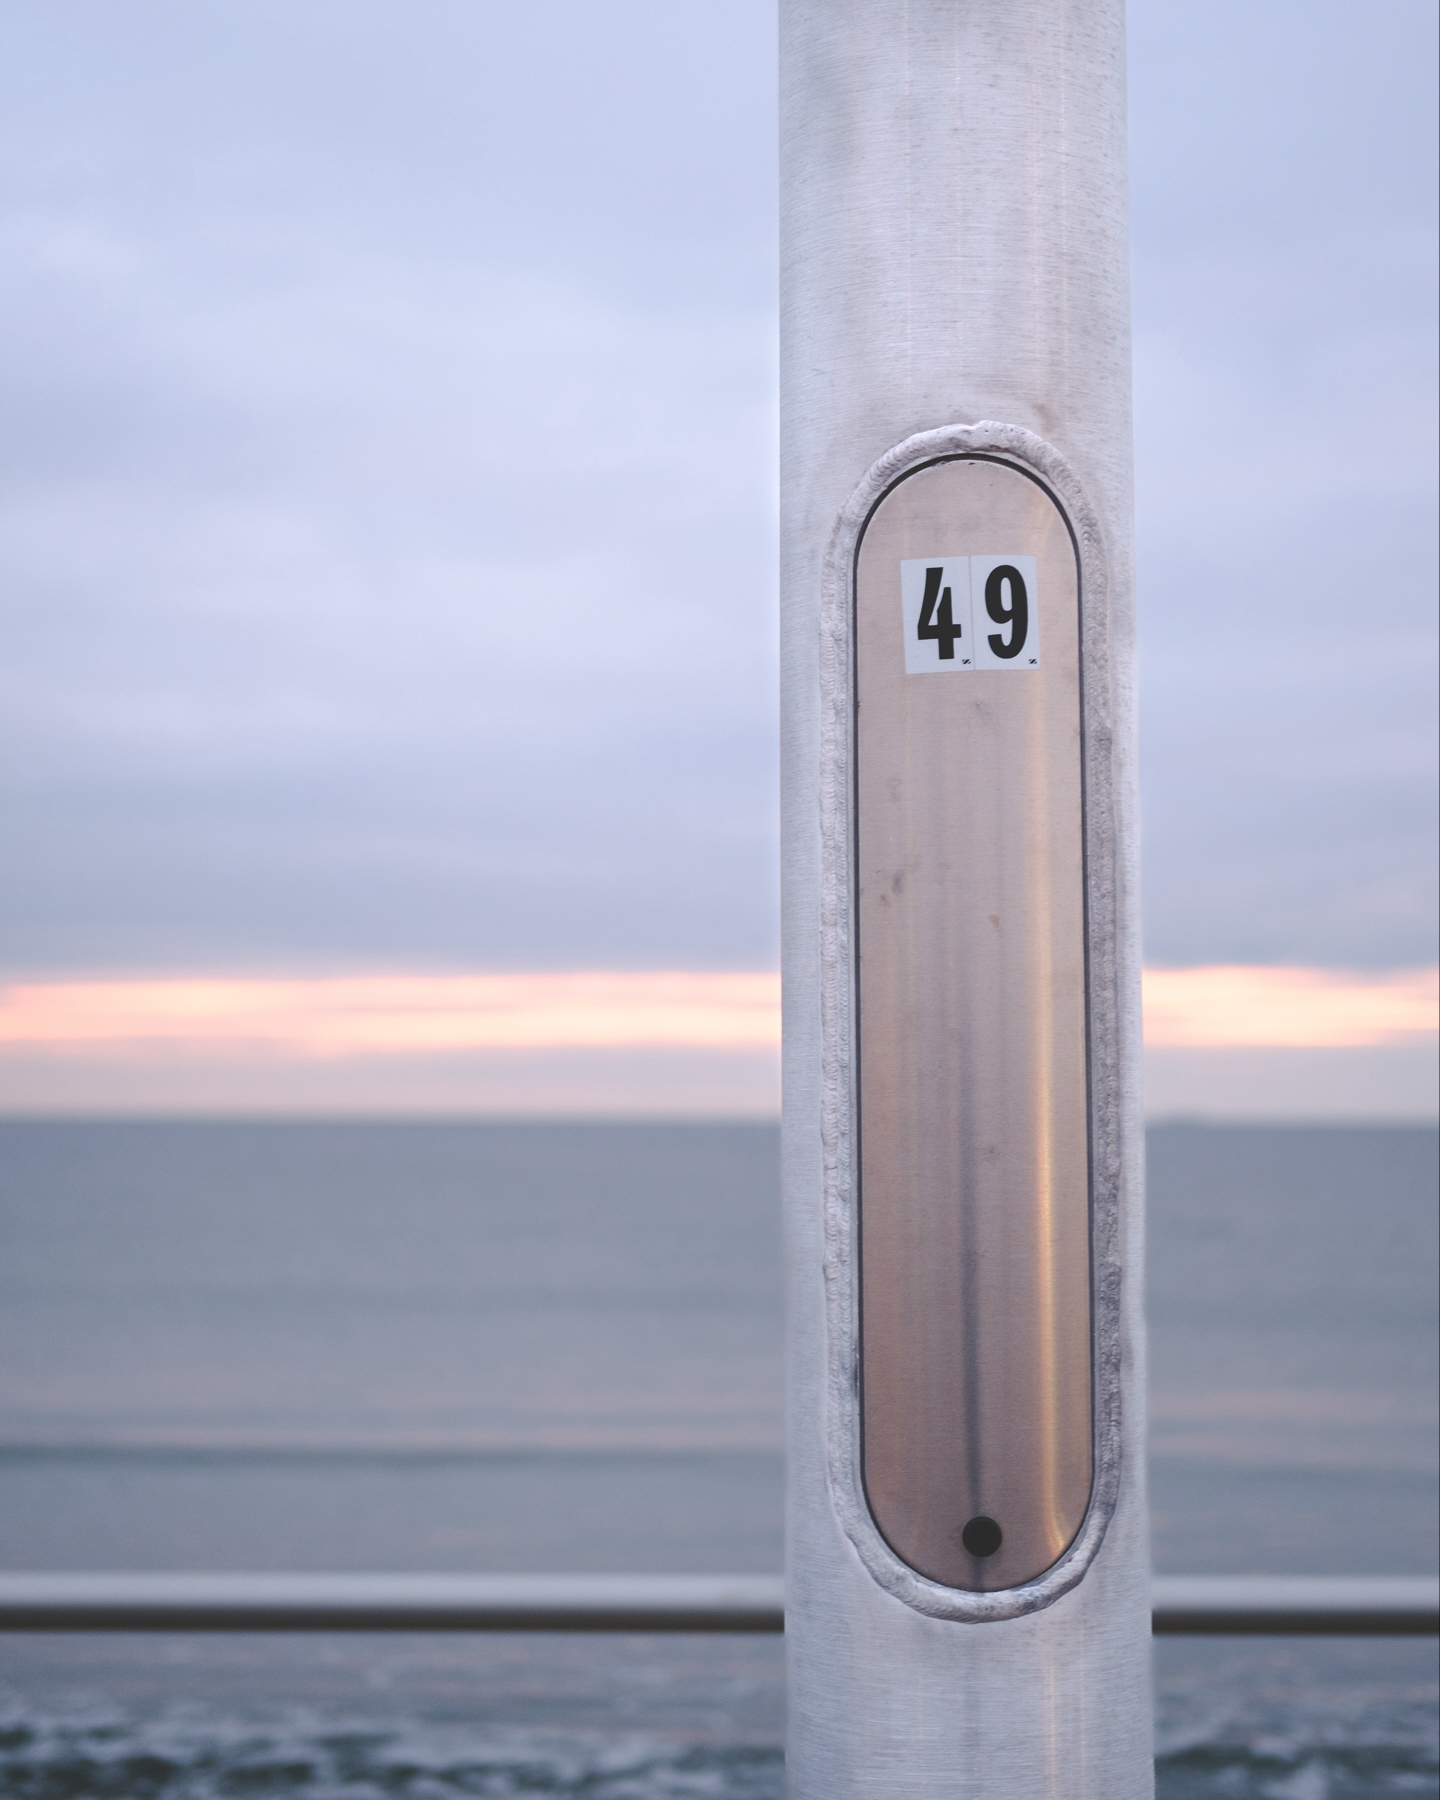 A close-up of a metallic pole with a number plaque reading “49” against a blurred background of a pale sunrise over the sea.